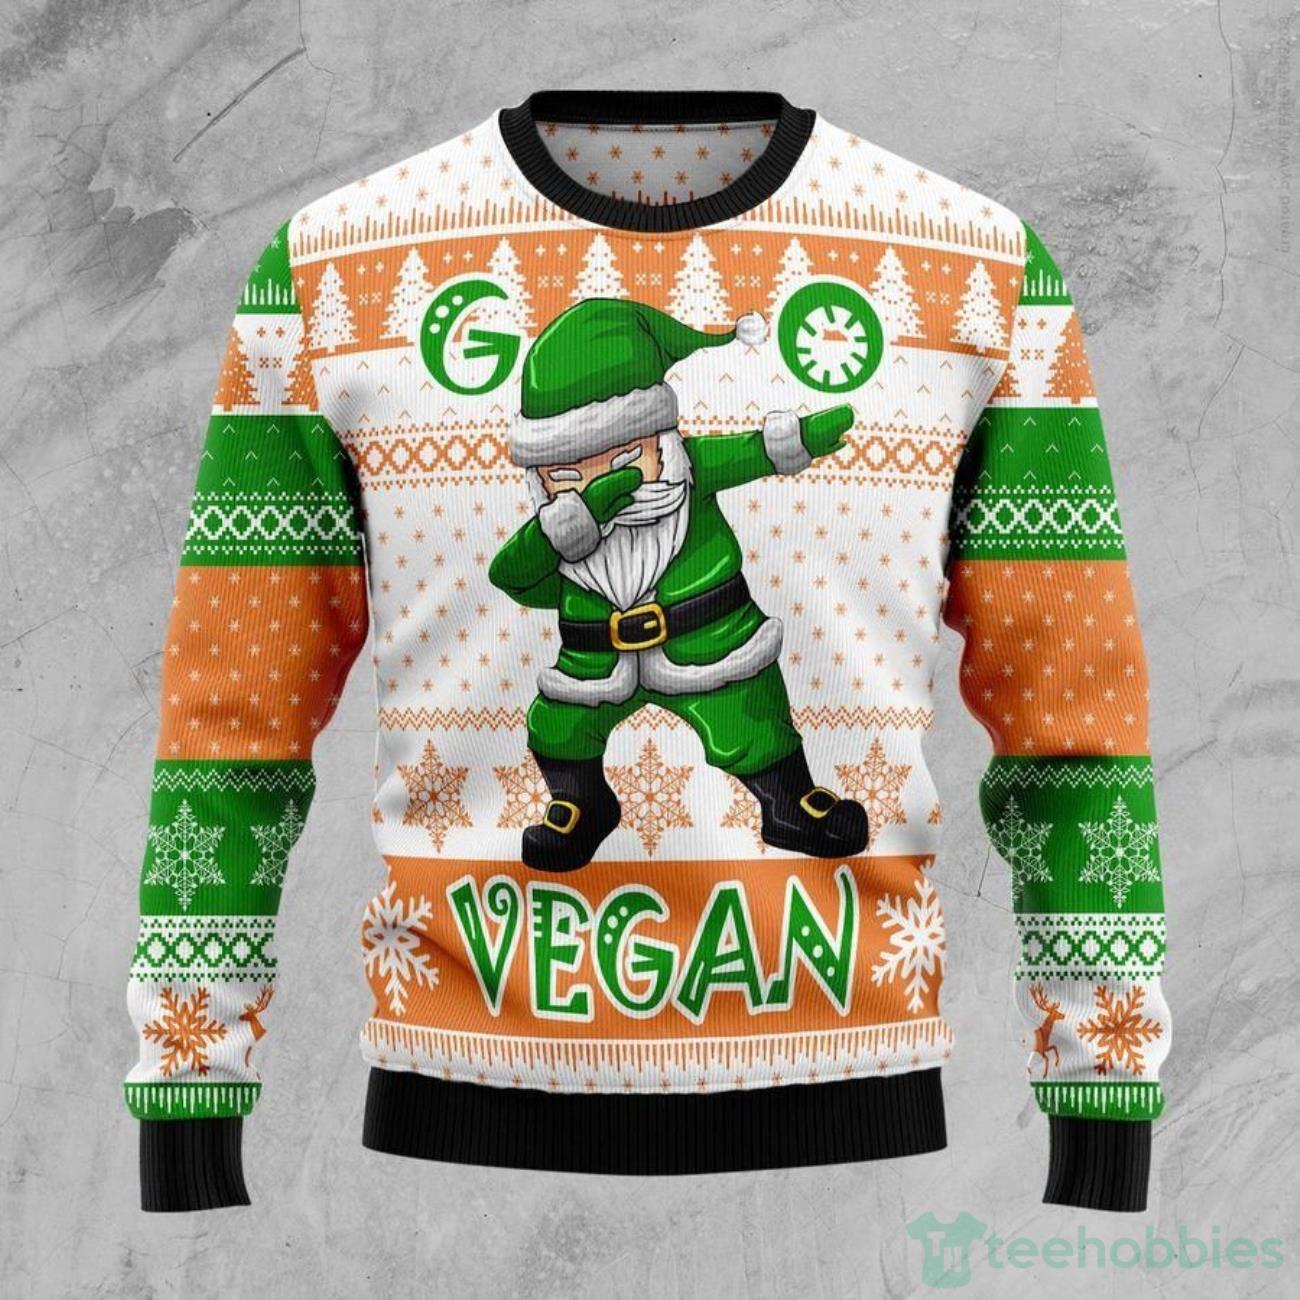 Go Vegan Ugly Sweater For Christmas Product Photo 1